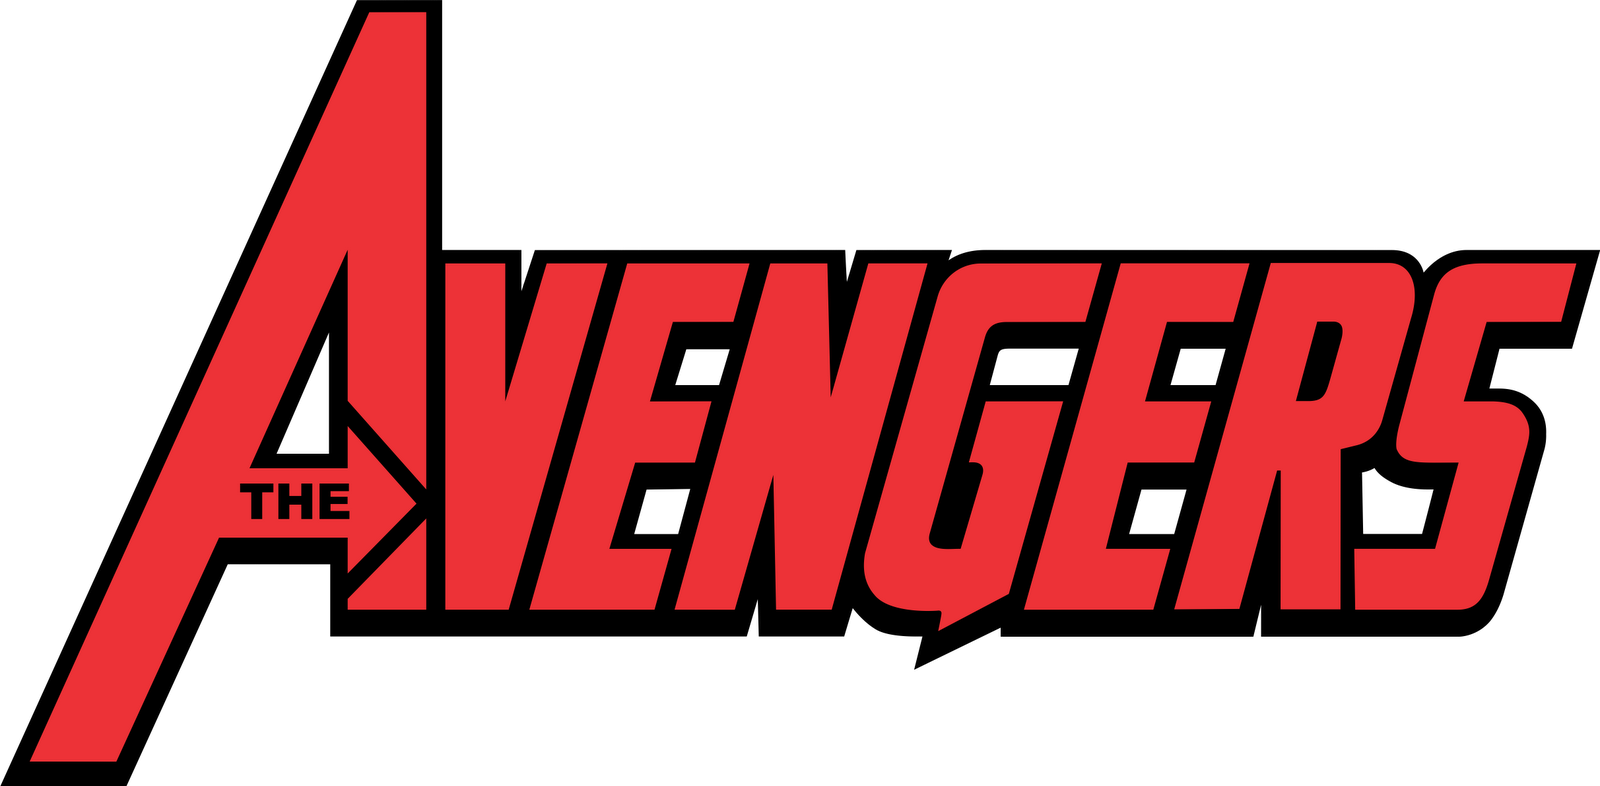 Marvel Logo Png Files for Print and Cricut Clipart Avengers - Etsy | Marvel  logo, Marvel, Clip art